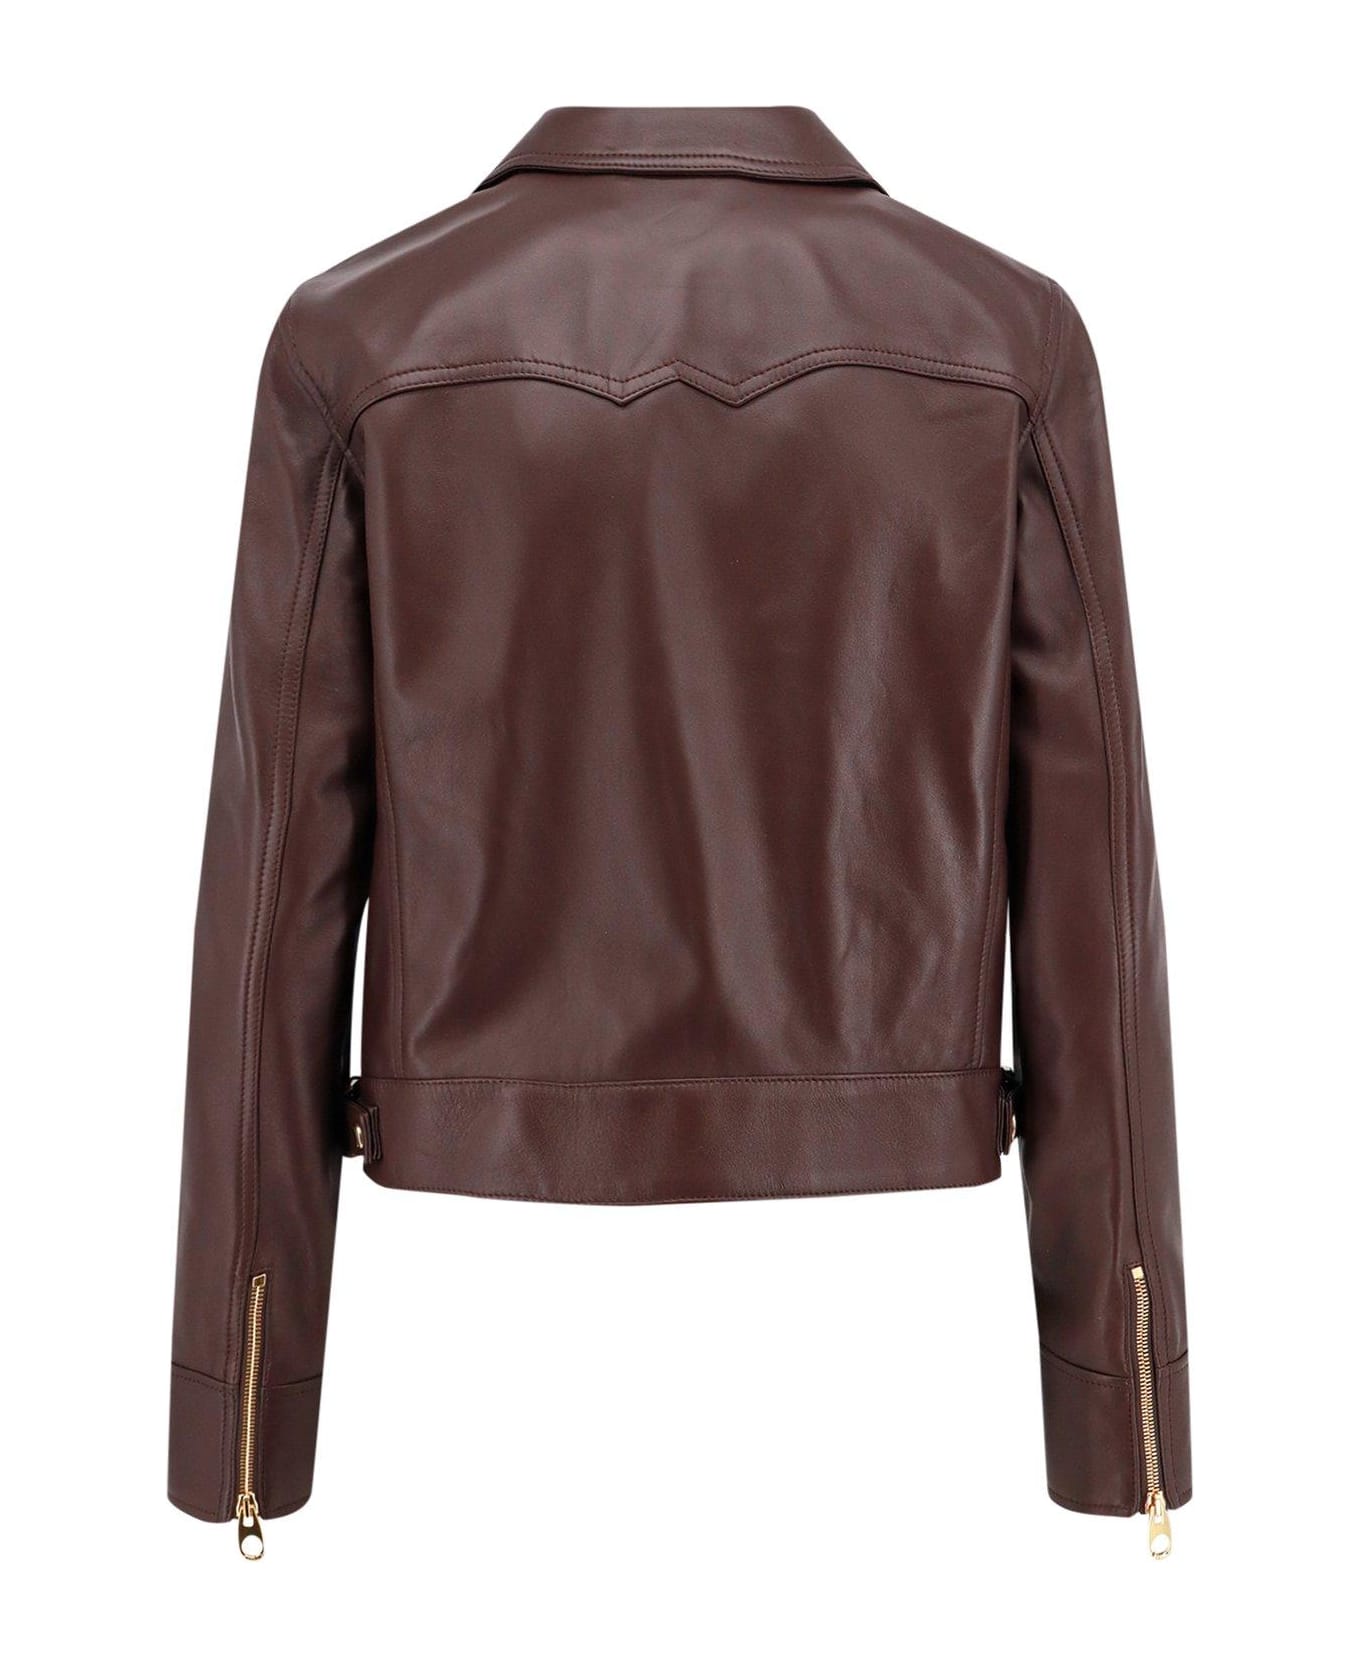 Chloé Zip-up Leather Jacket - Brown